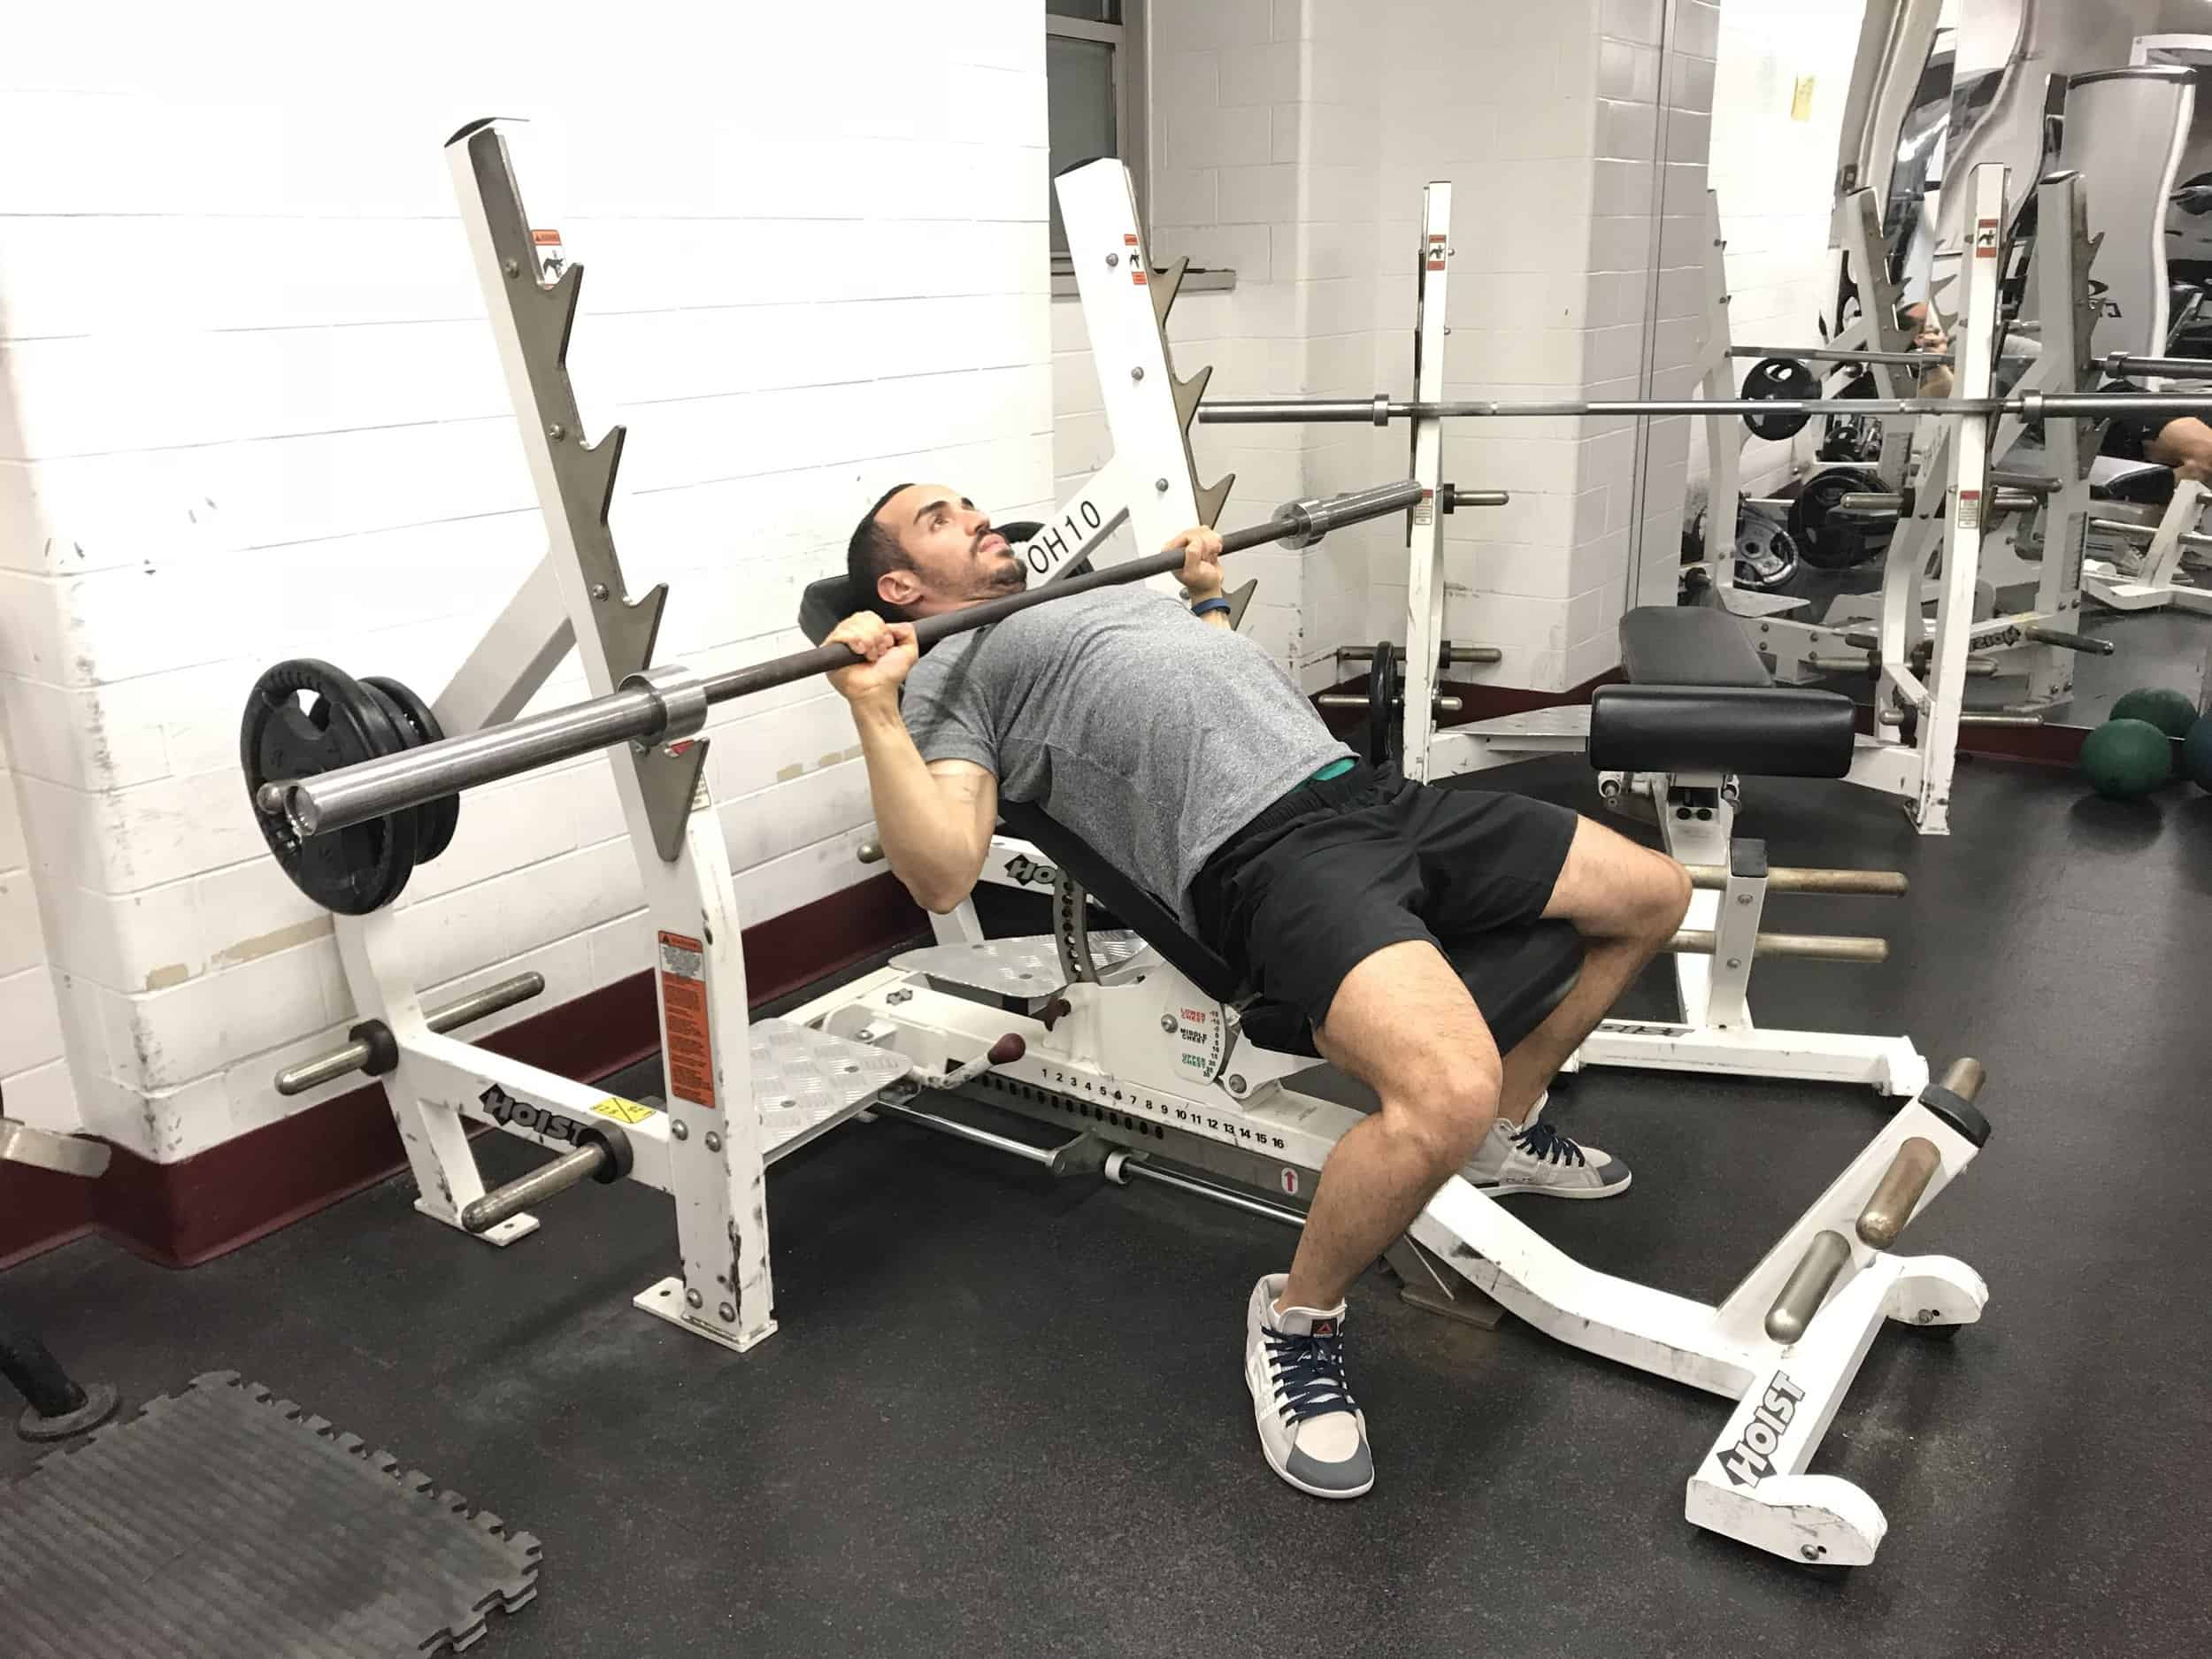 incline-bench-press-bottom-position with barbell lowered to upper chest